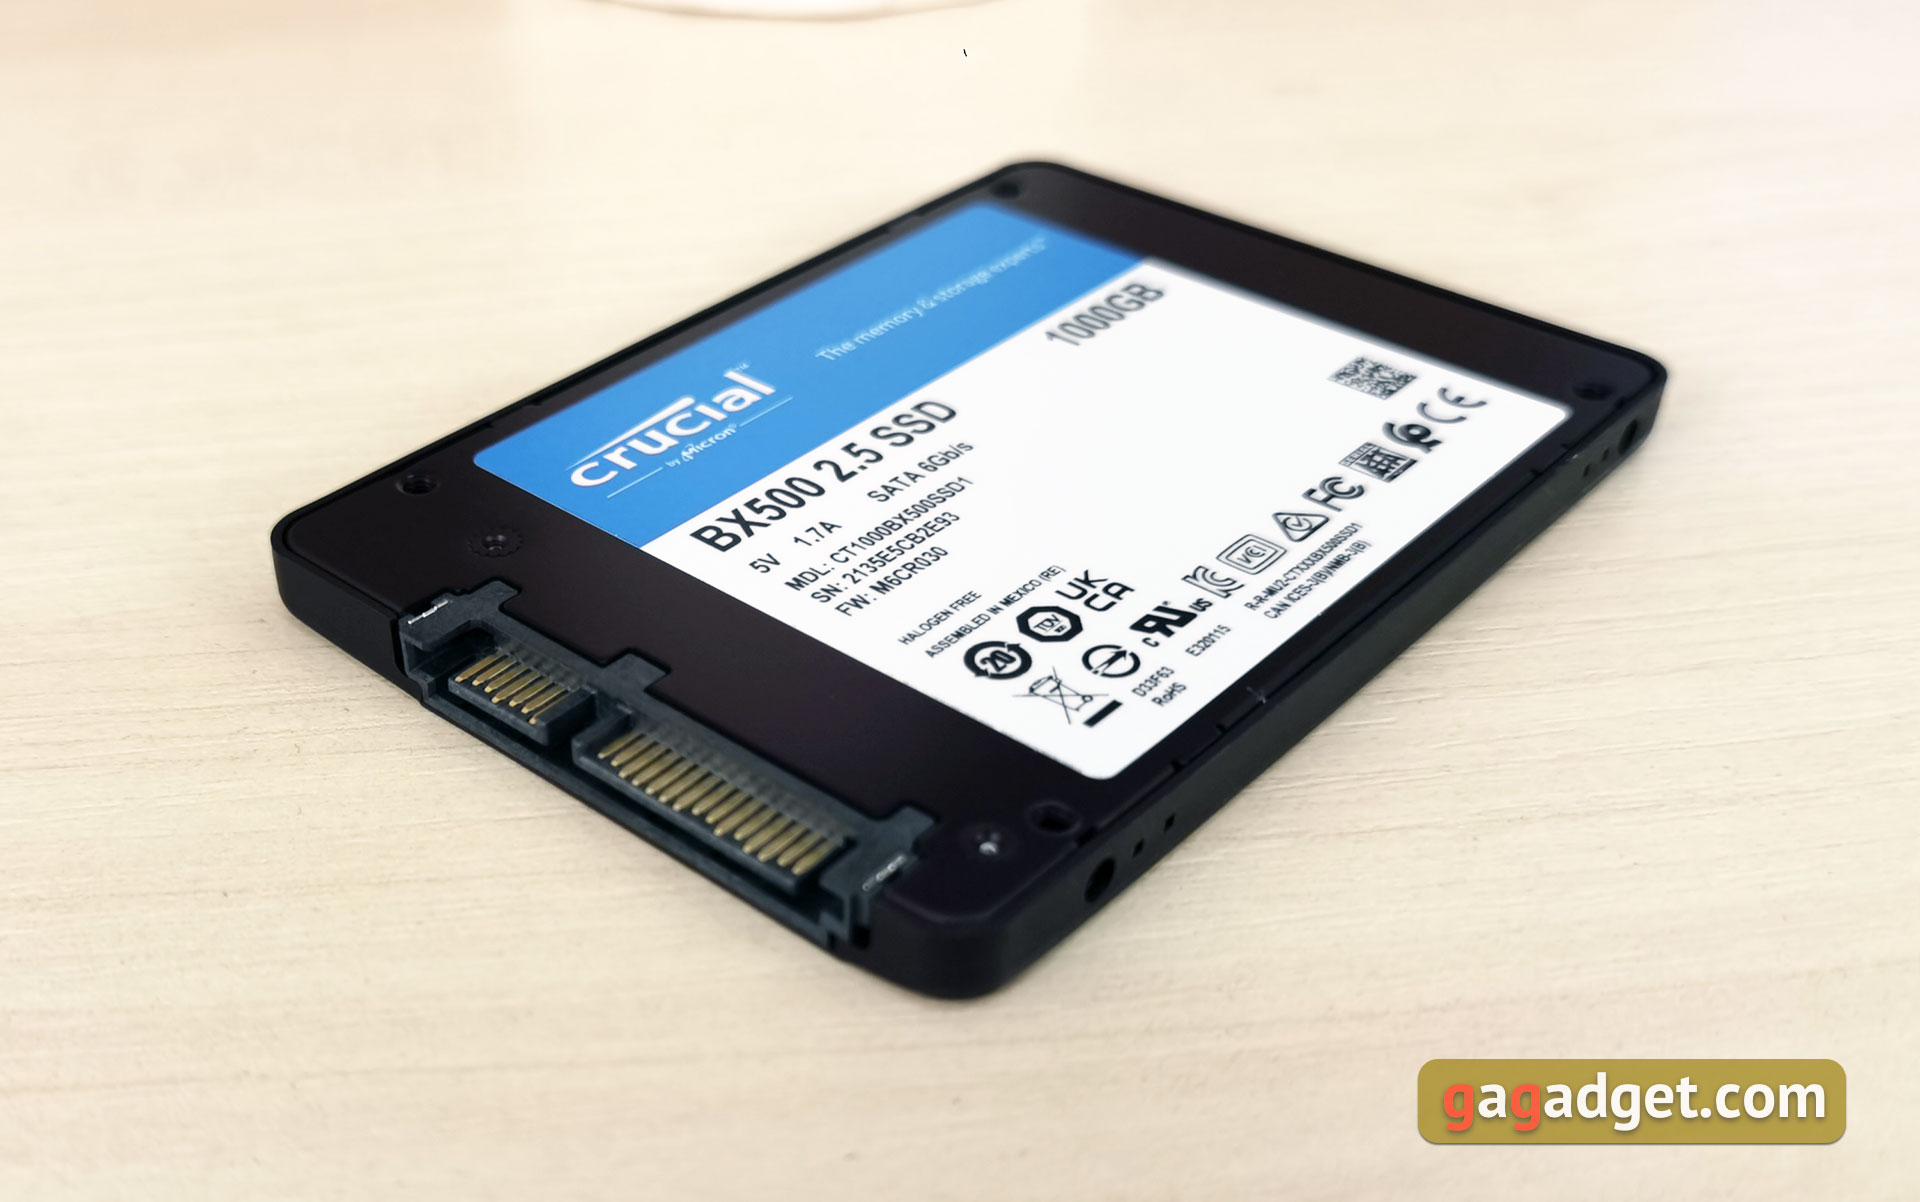 CRUCIAL BX500 - SSD - 2 TO - SATA 6GB/S